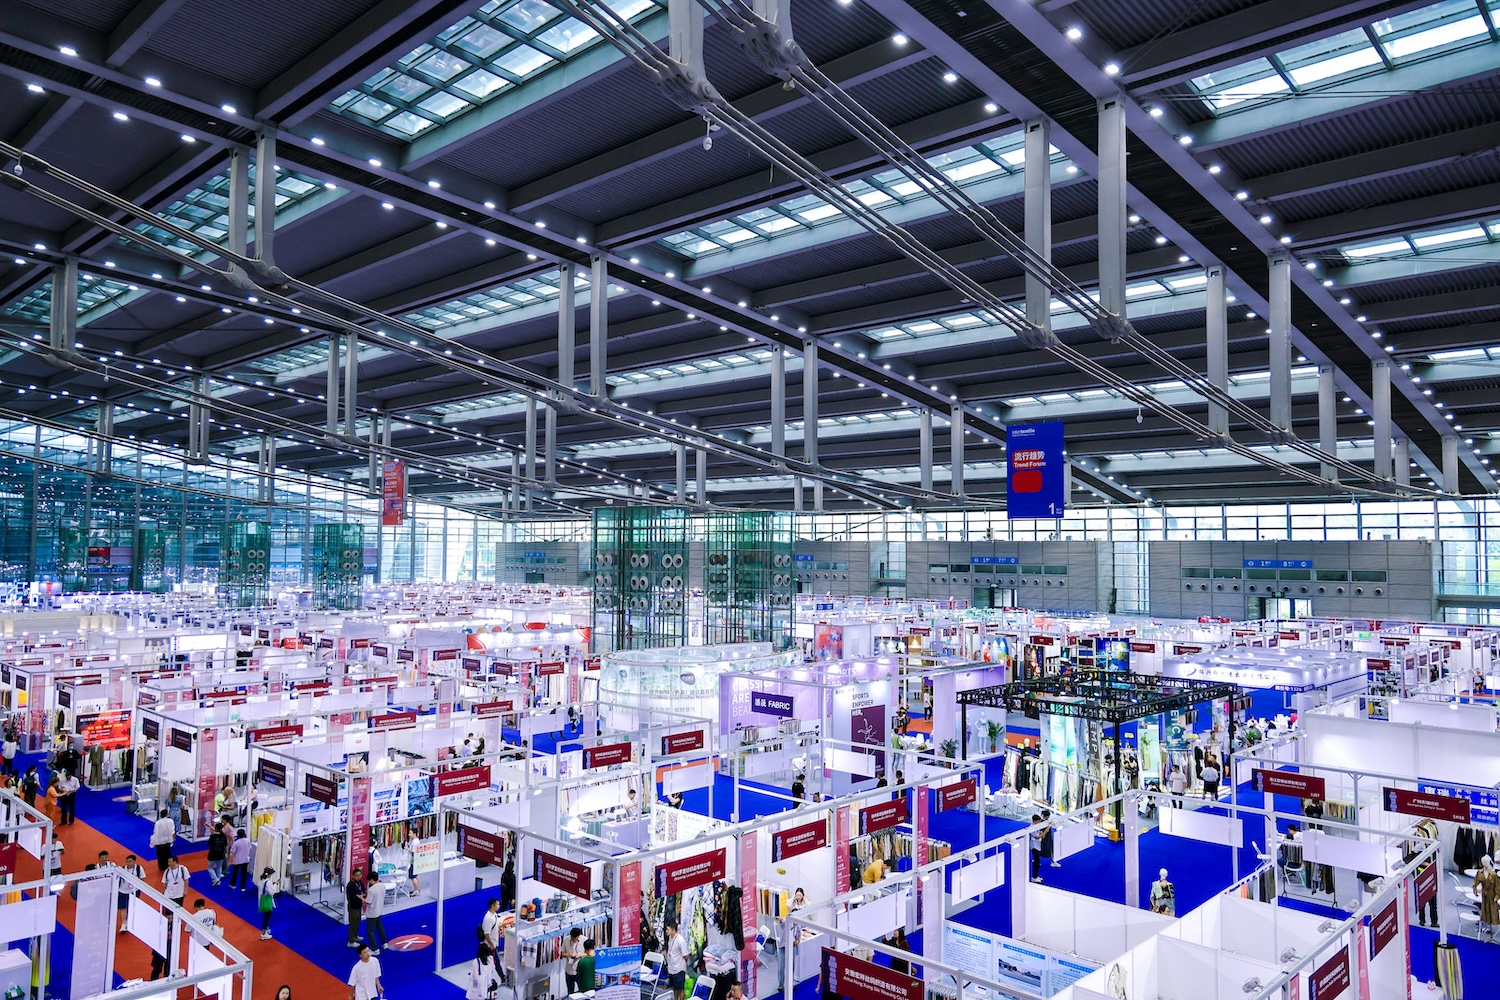 On the floor at the Shenzhen Convention and Exhibition Center (Futian). © Messe Frankfurt (HK) Ltd